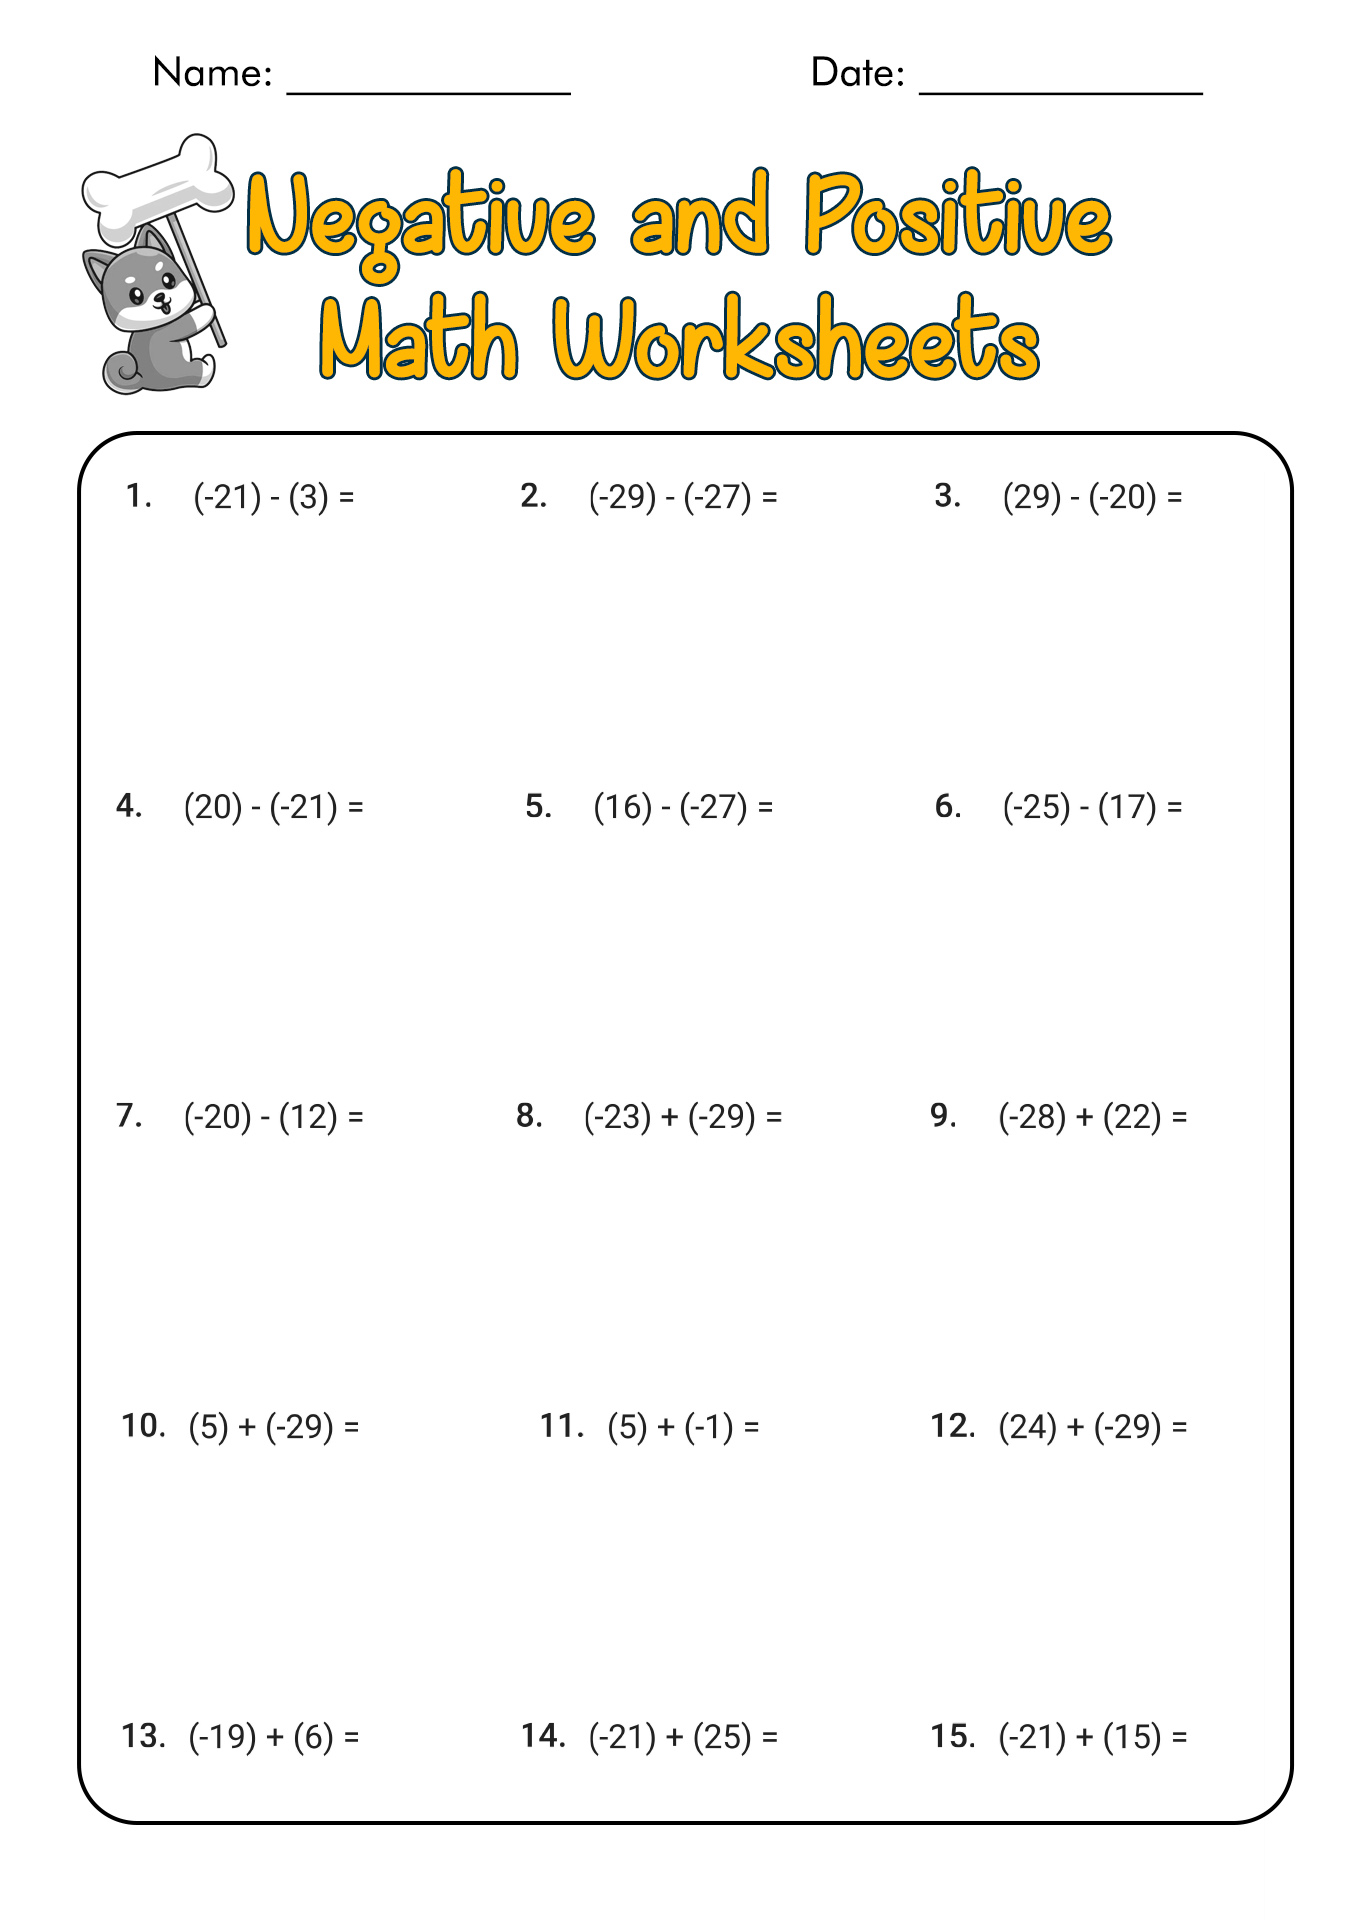 Negative and Positive Math Worksheets